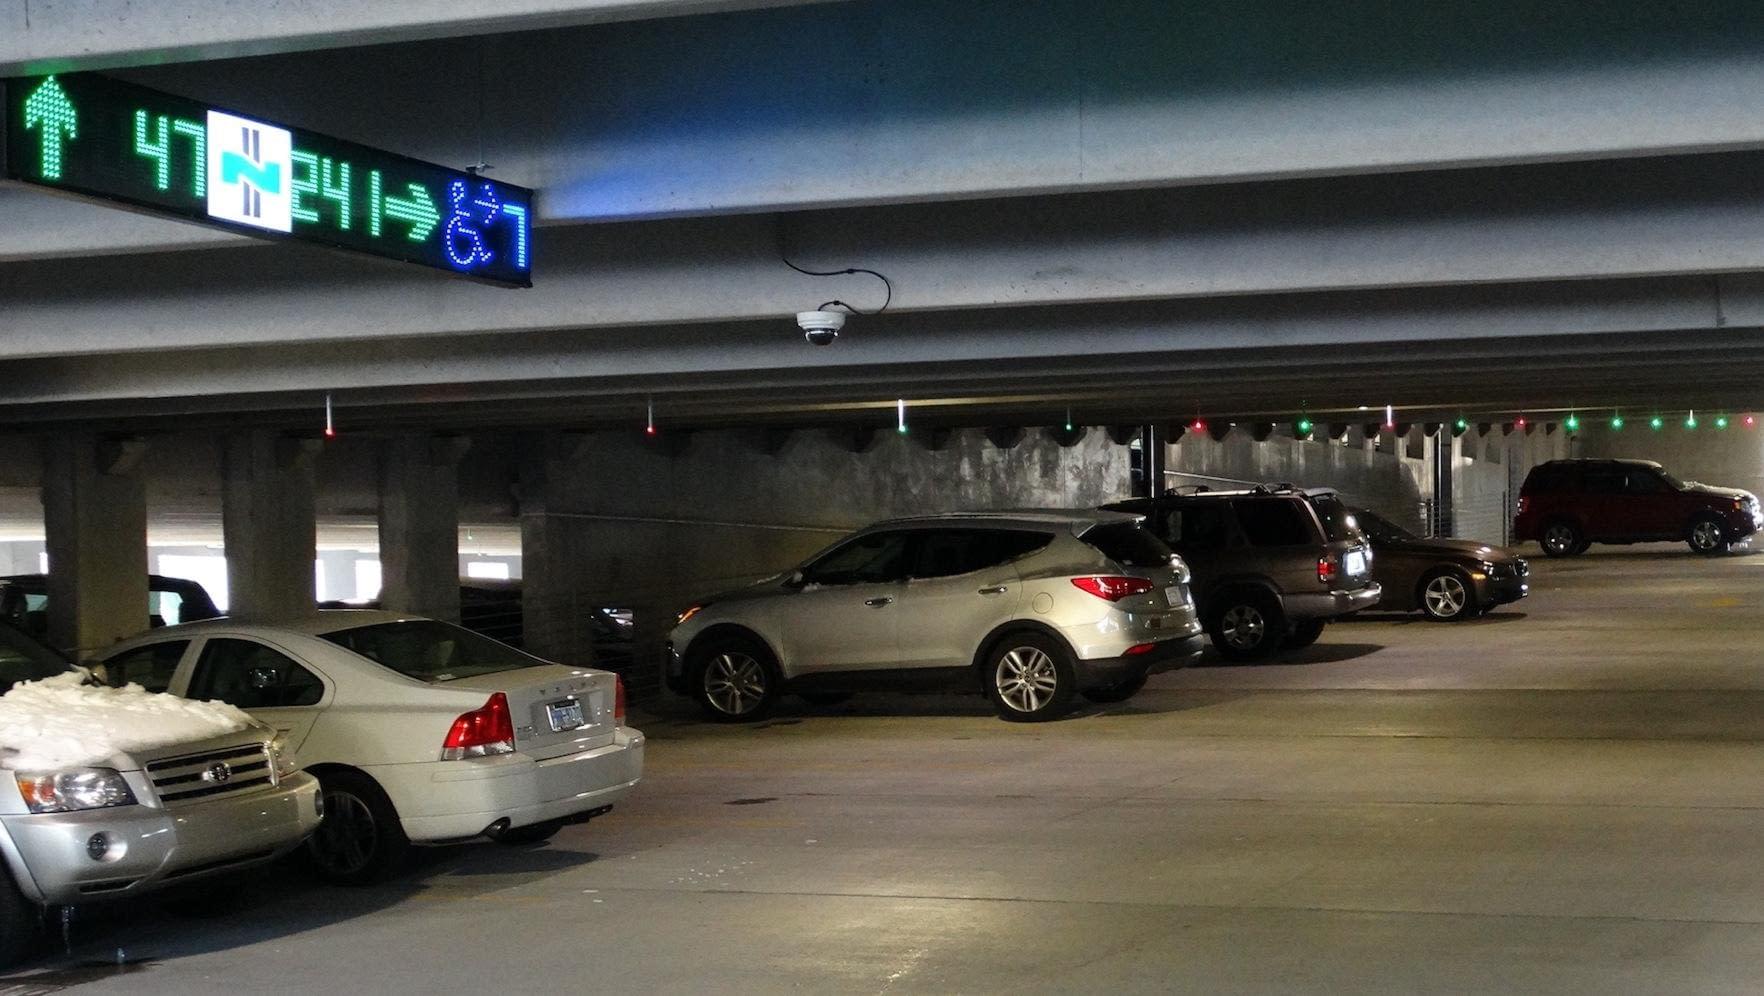 North Carolina Hospital Adds INDECT Parking Guidance System to Improve Parking Experience.